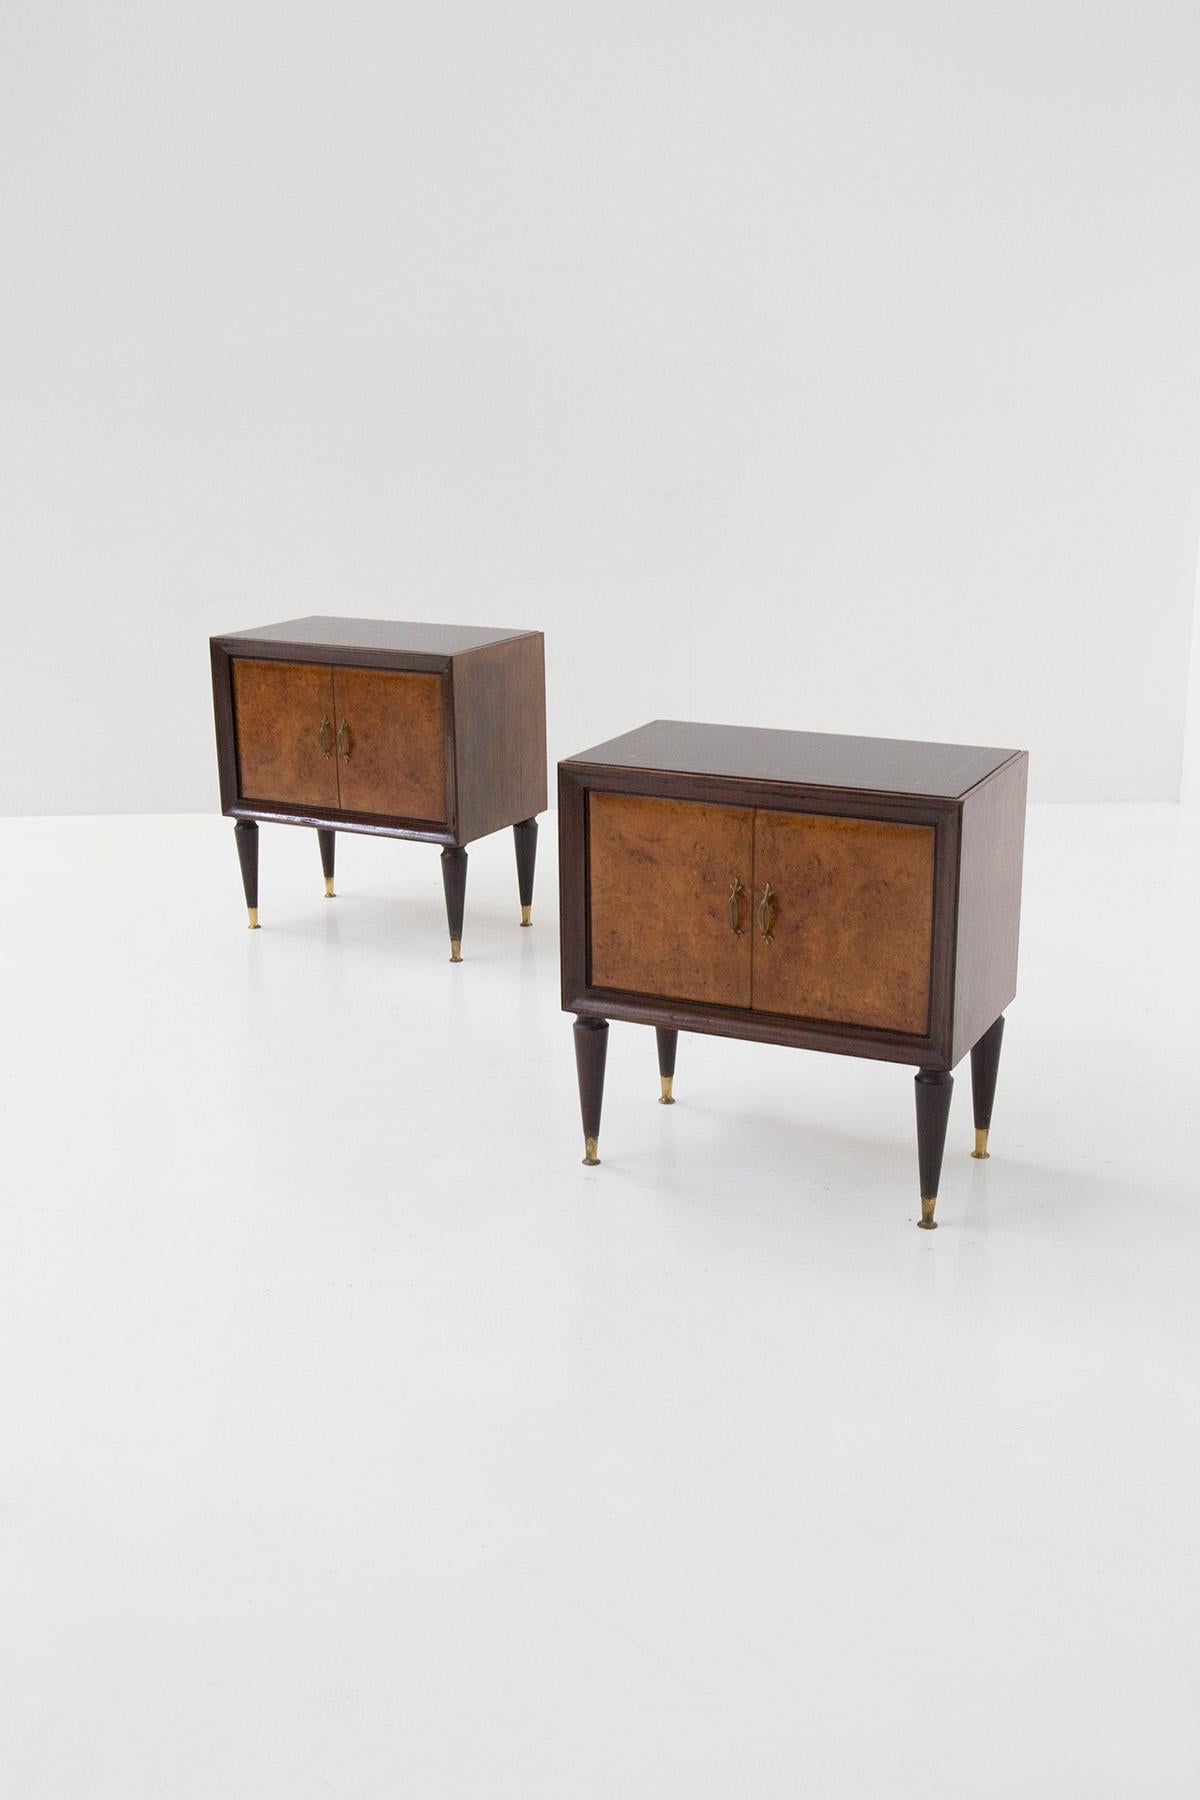 Elegant pair of 1950s Italian bedside tables attributed to Paolo Buffa. The bedside tables present a typical Italian mid-century line. They are made of different woods, in fact for its frame we notice a walnut wood while its where doors are made of